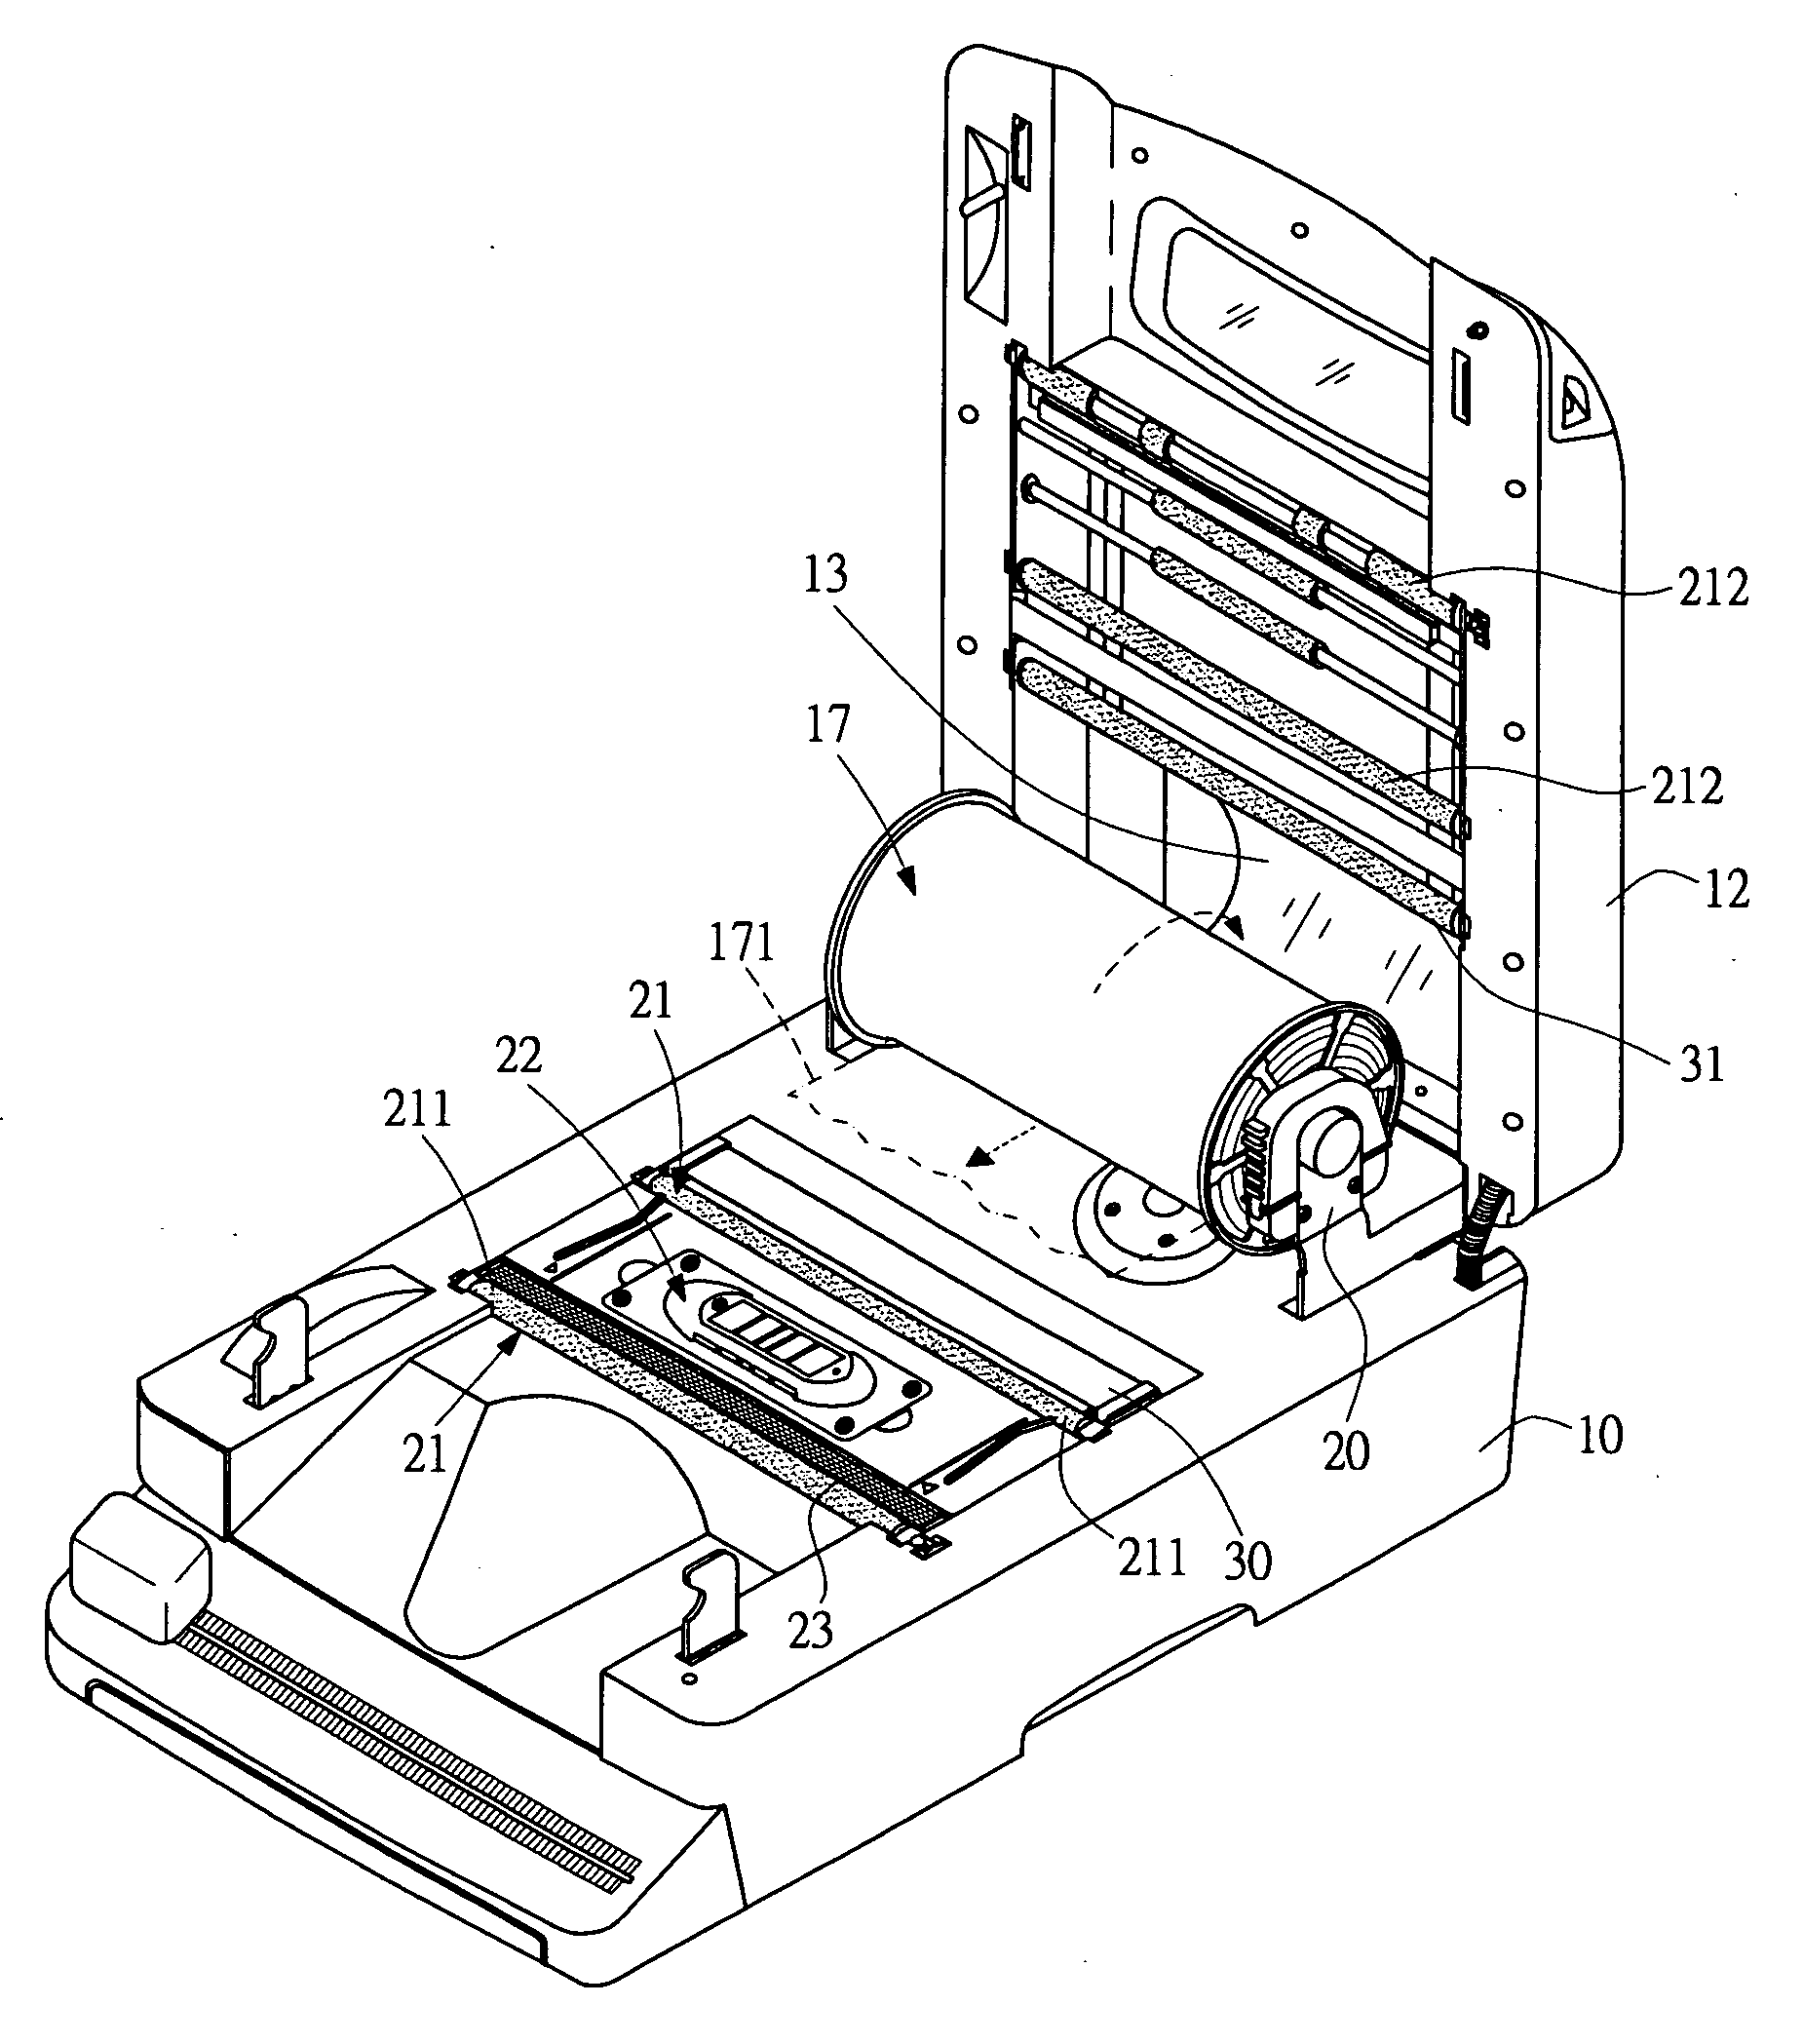 Film-aligning device for air cushion maker